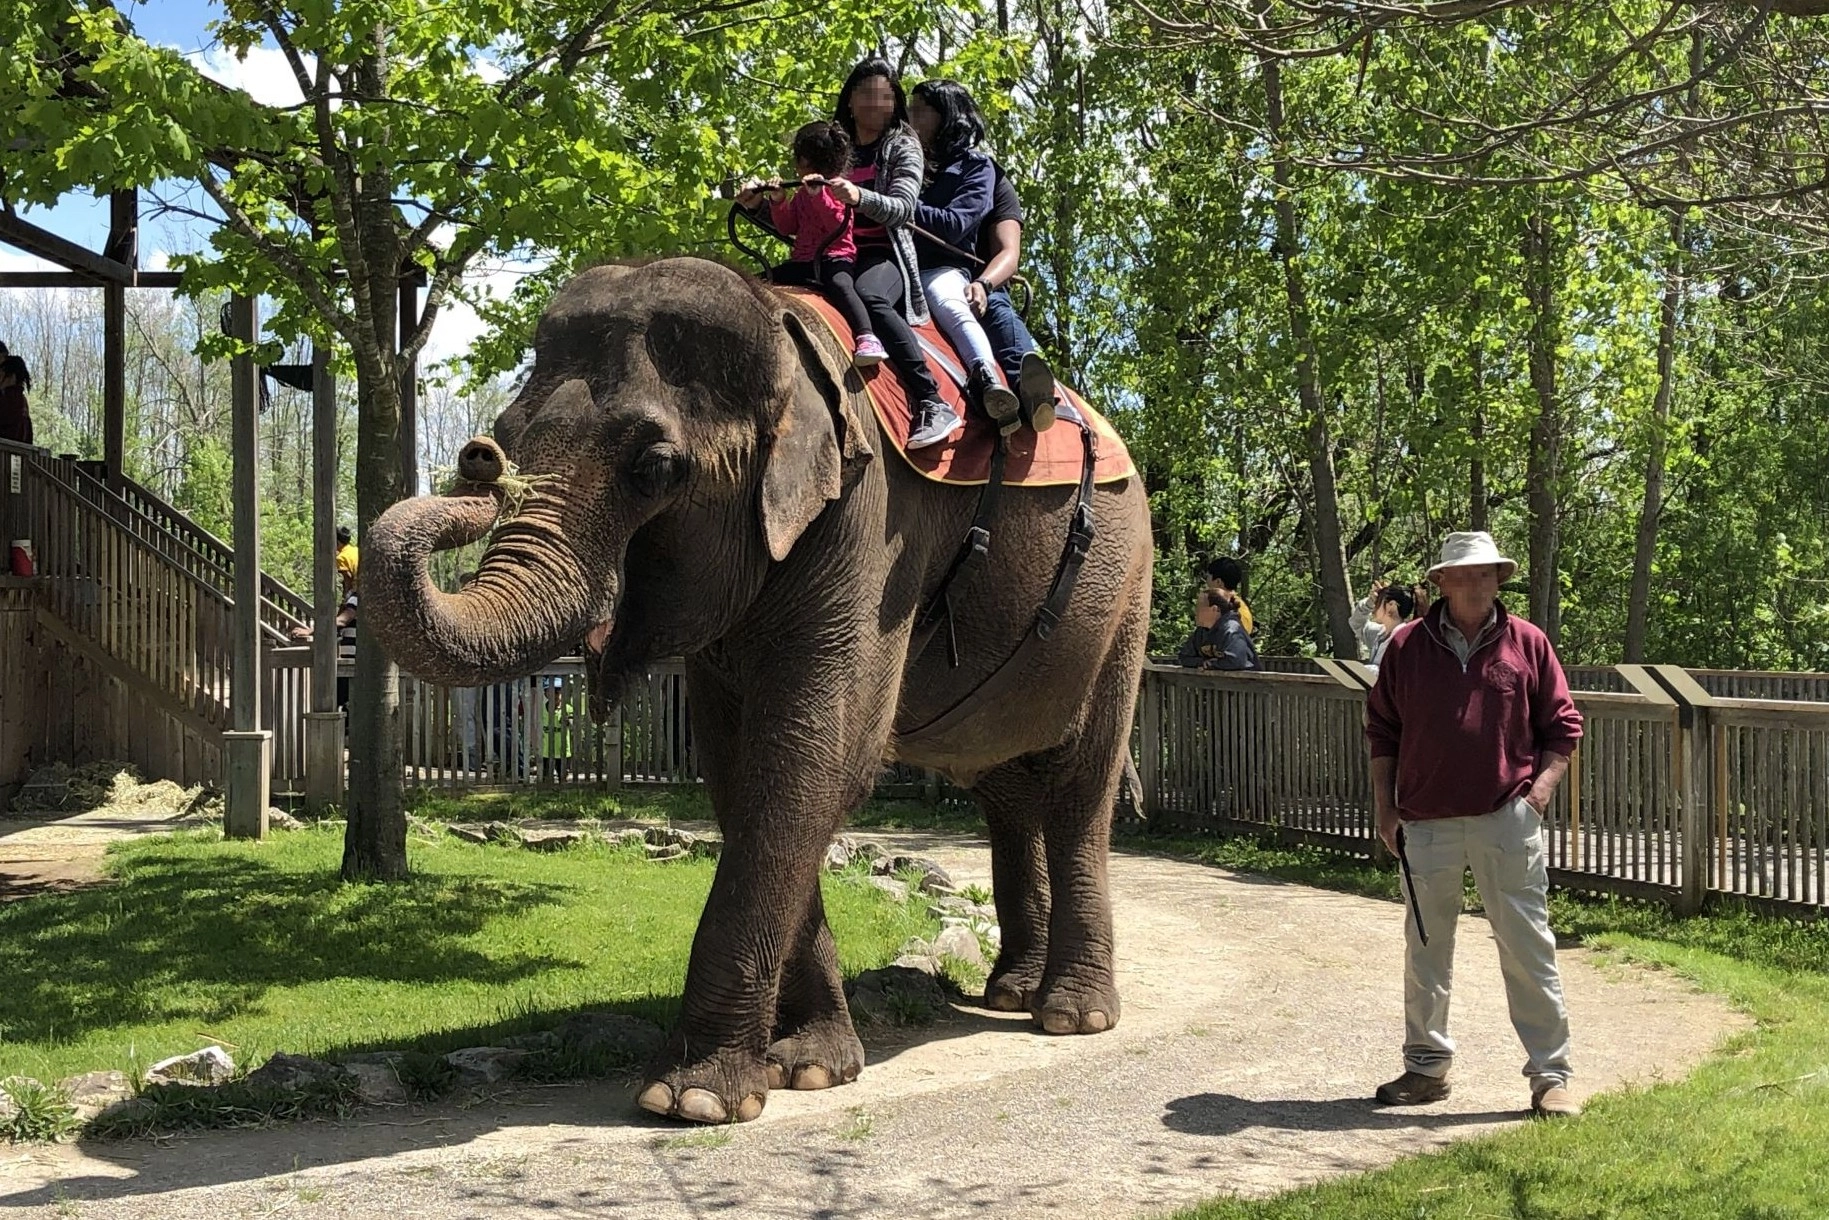 Elephant riding offered at African Lion Safari on June 2, 2019. Photo: World Animal Protection